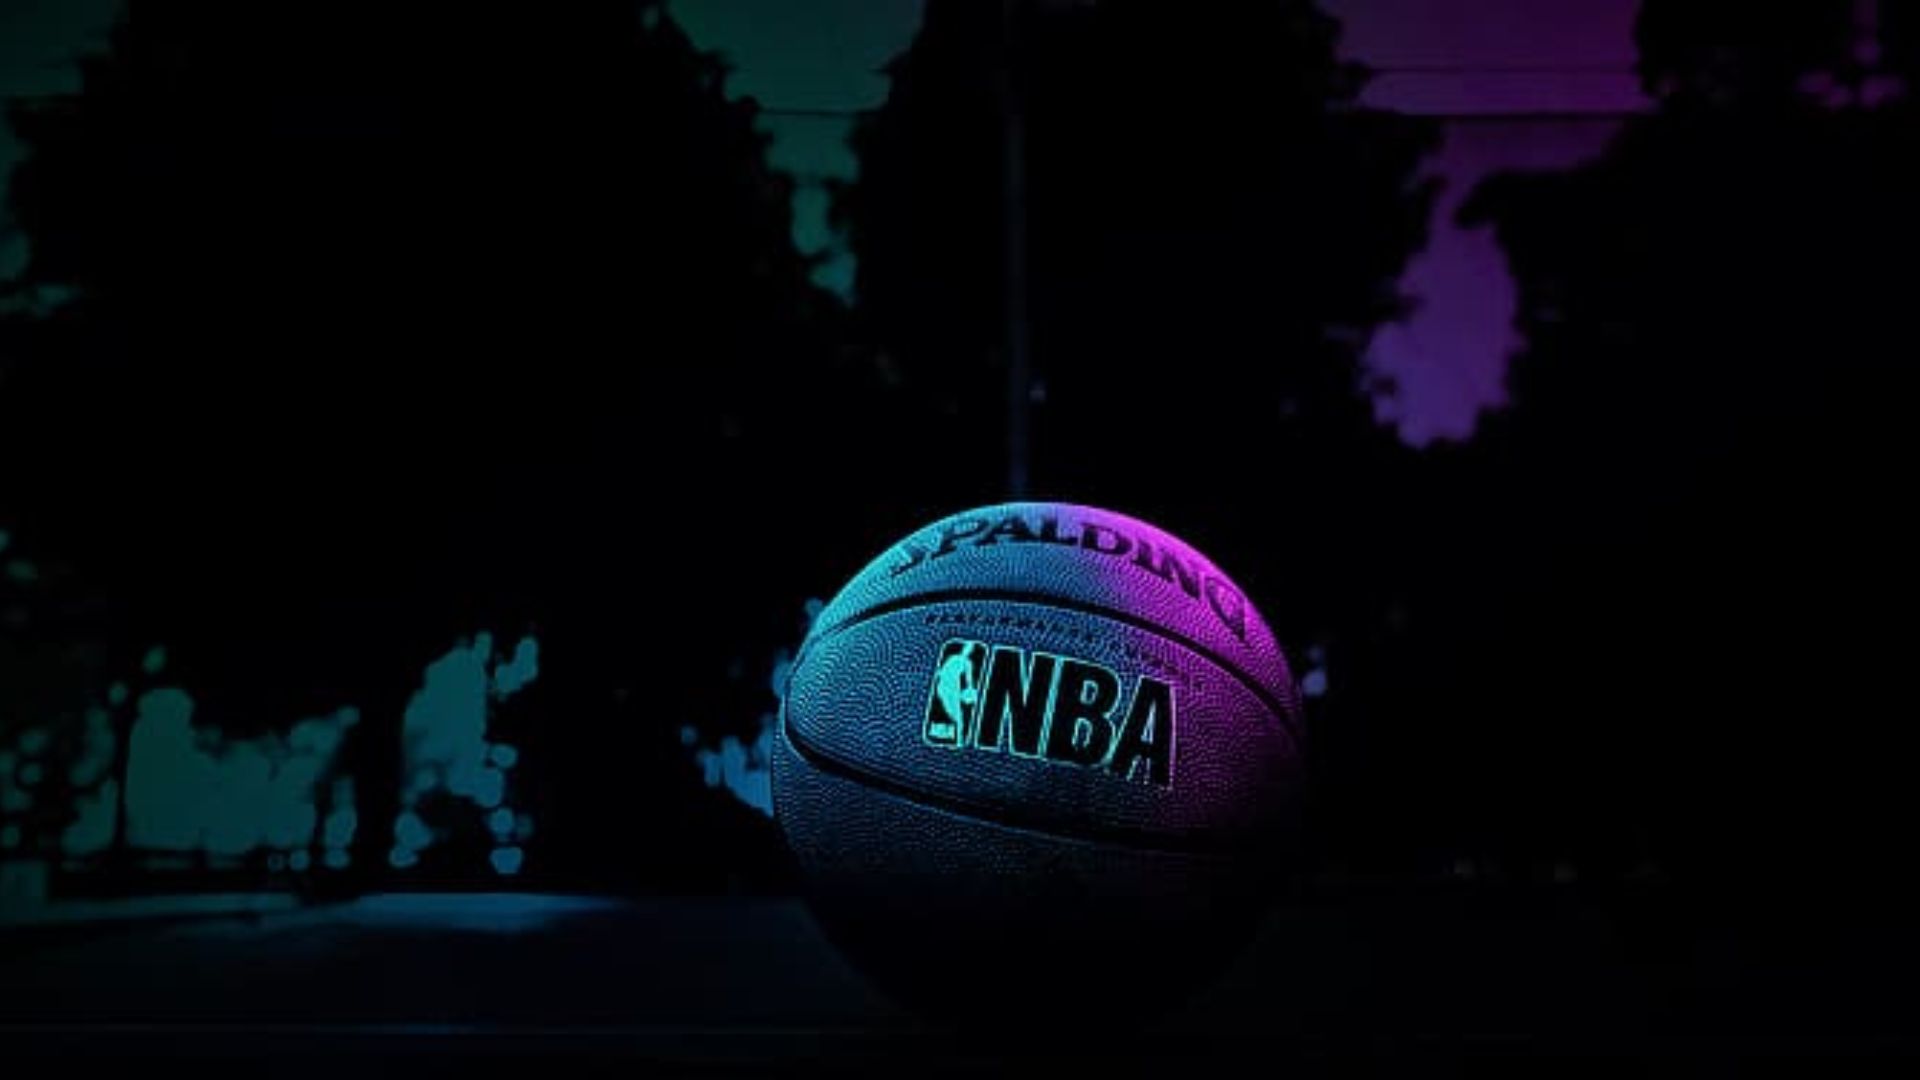 Basketball Wallpaper: Top Free Basketball Background, Picture & Image Download